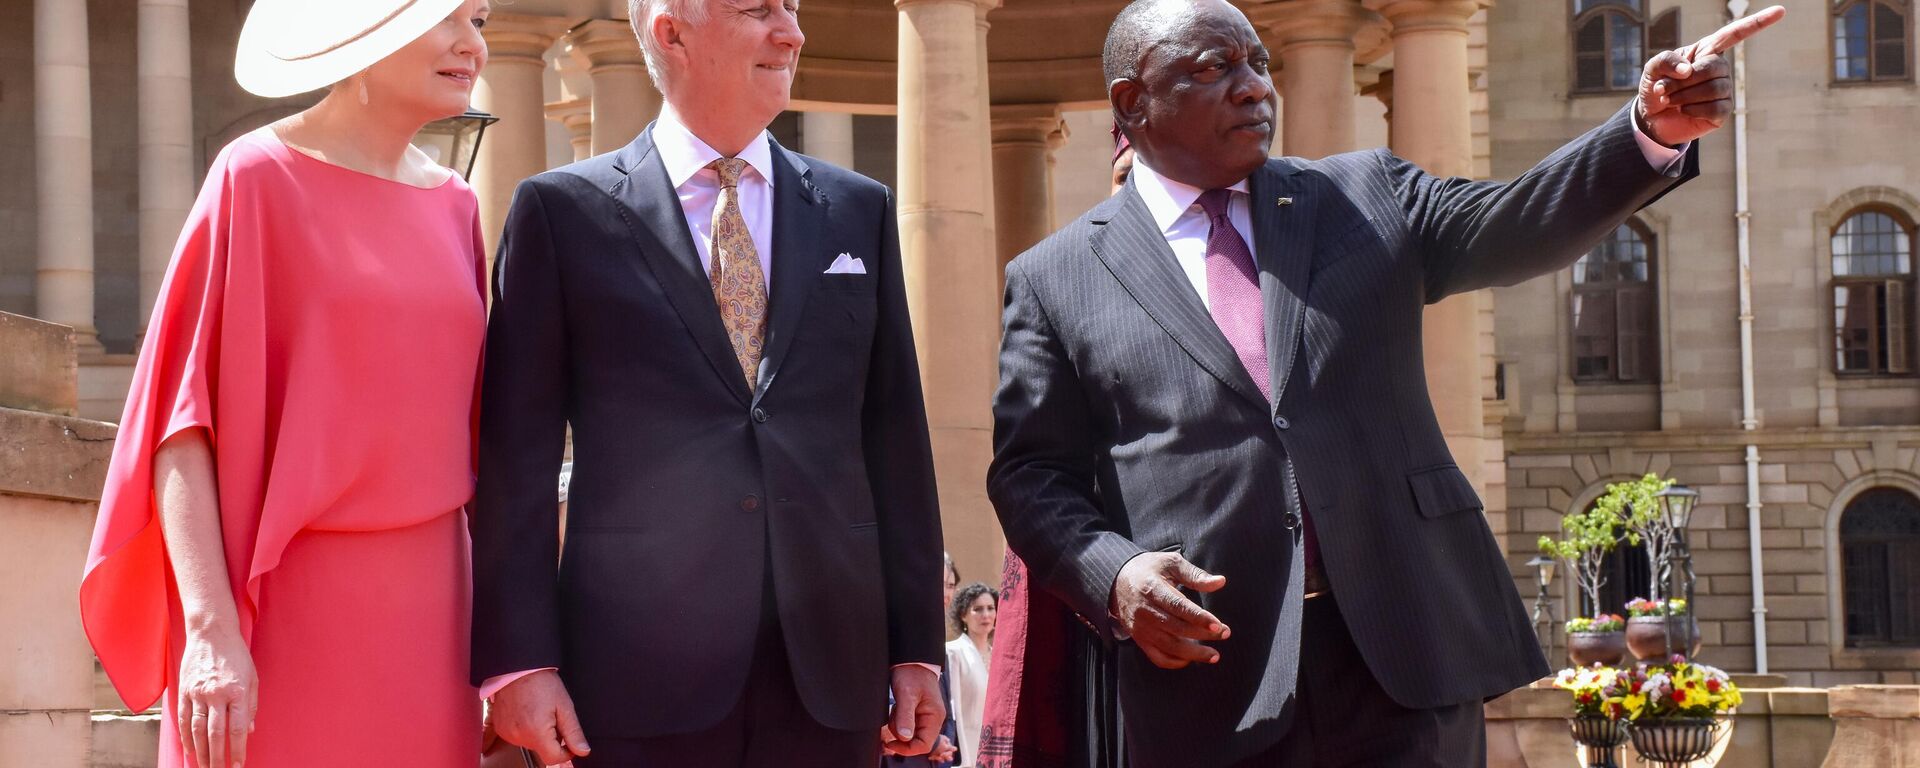 King Philippe of Belgium, center, and Queen Mathilde are welcomed by South African President Cyril Ramaphosa in Pretoria, South Africa, Thursday, March 23, 2023 - Sputnik International, 1920, 25.03.2023